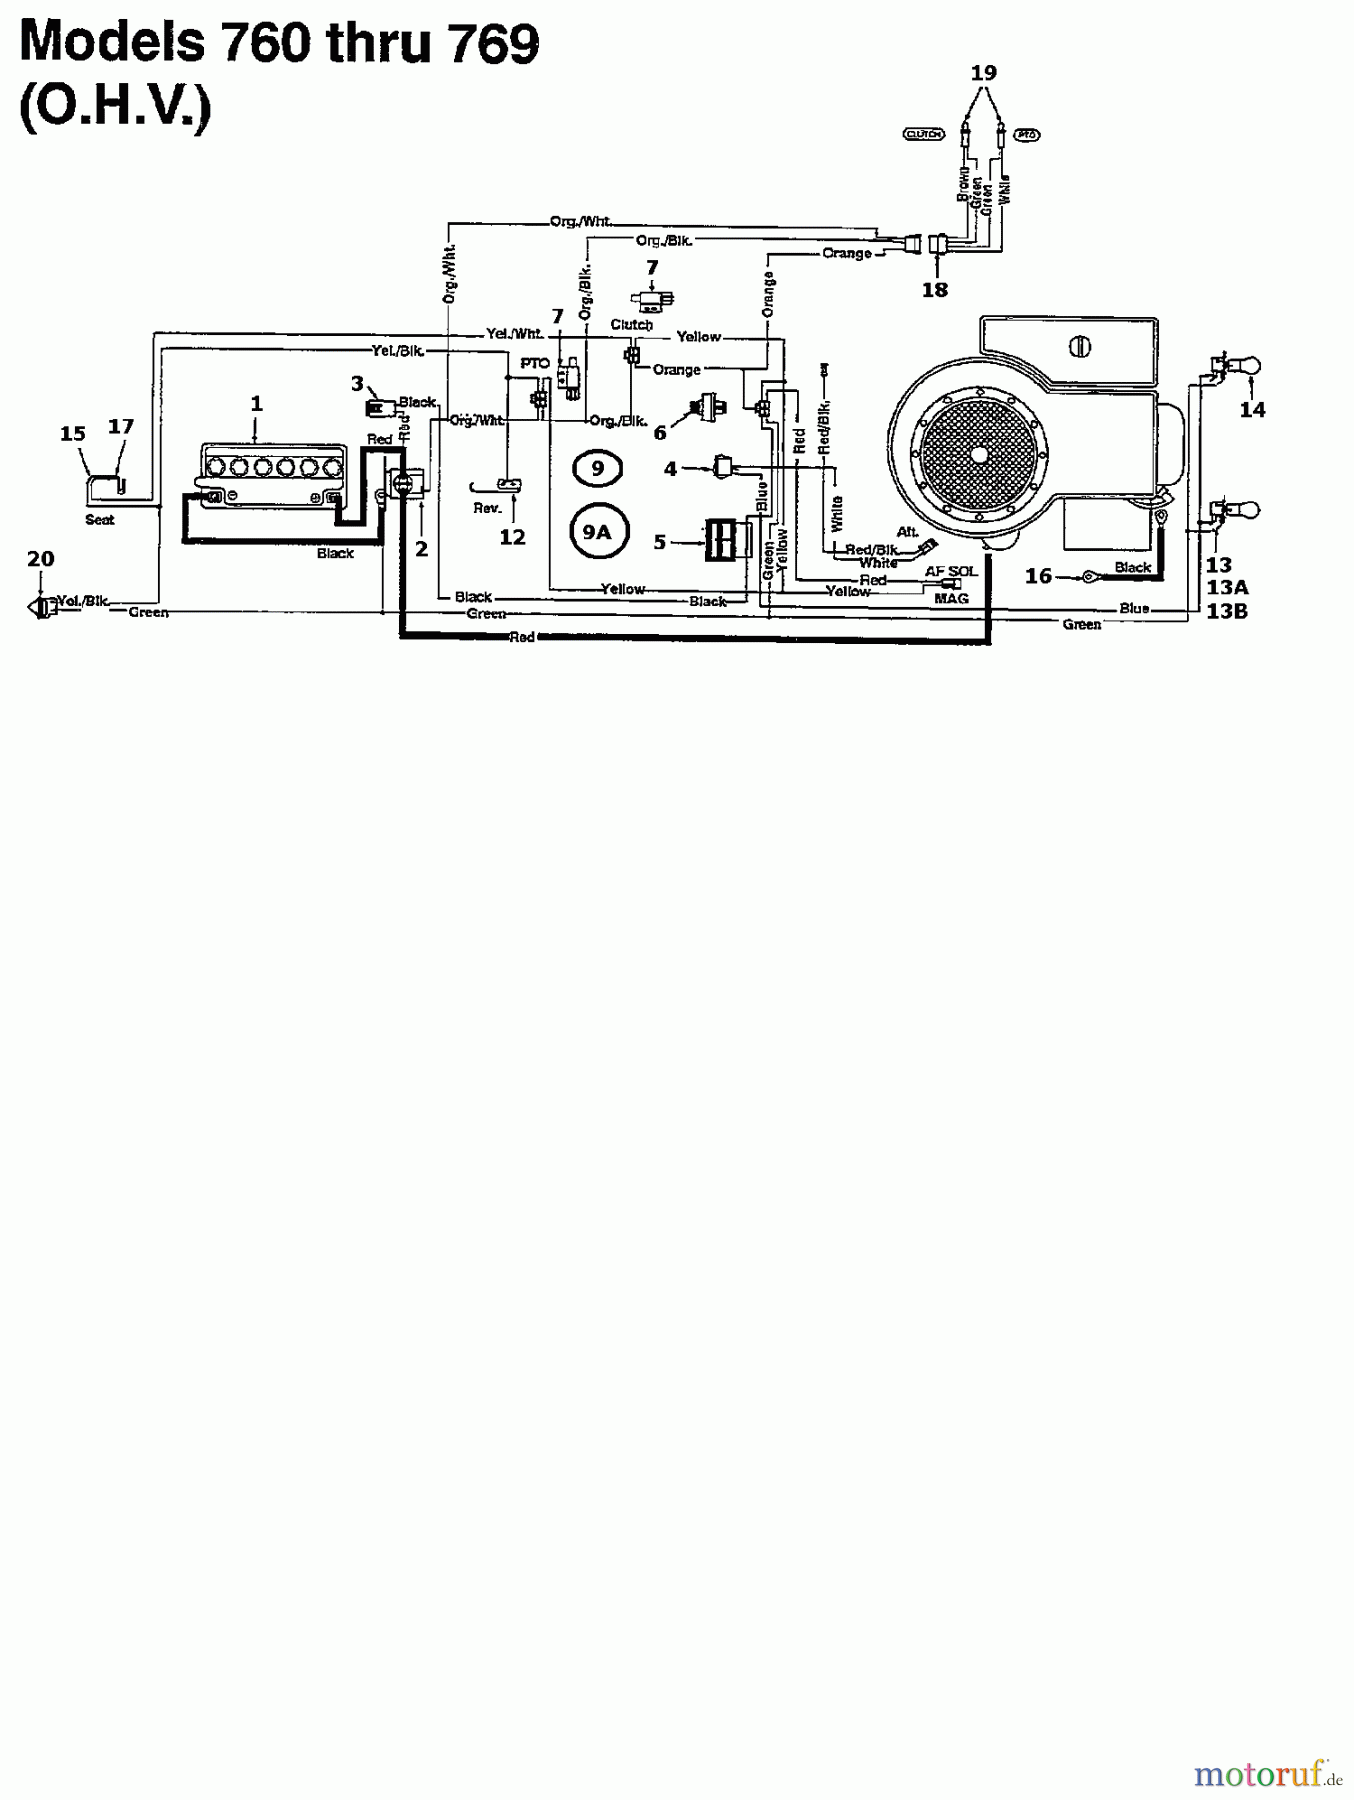  Motec Lawn tractors GT 160 RD 135T764N632  (1995) Wiring diagram for O.H.V.